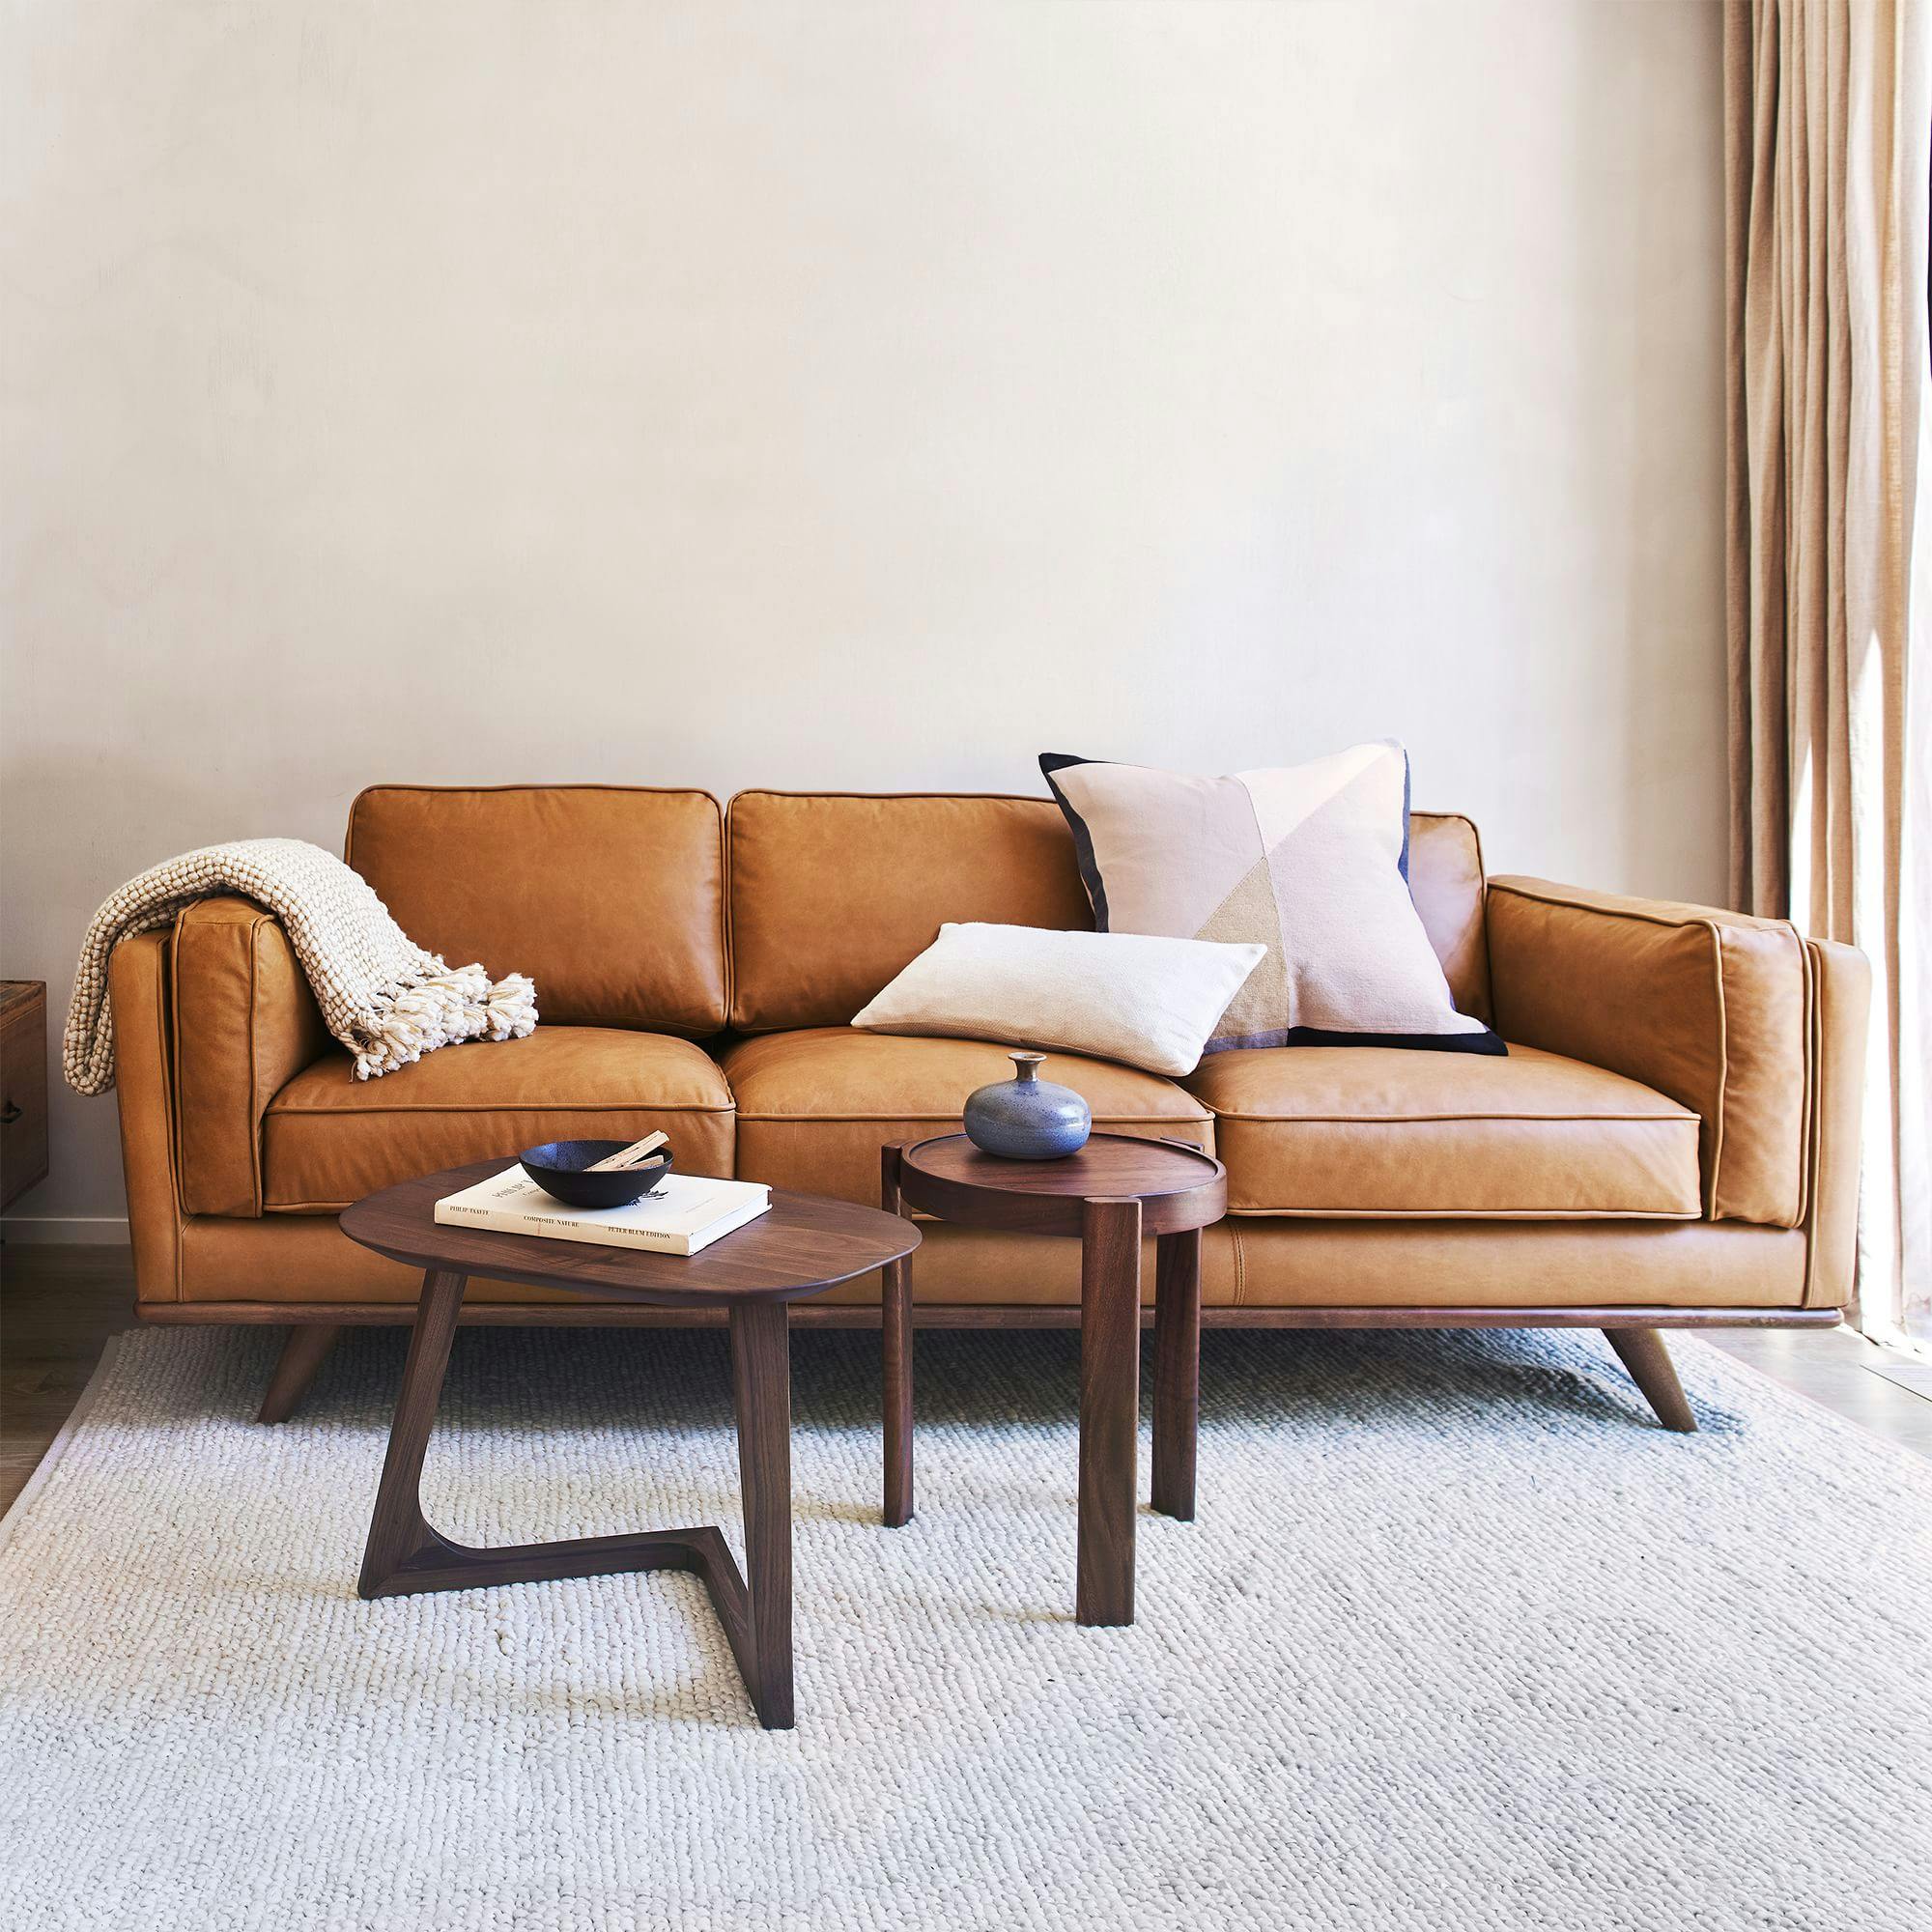 The Zander Leather Sofa from West Elm